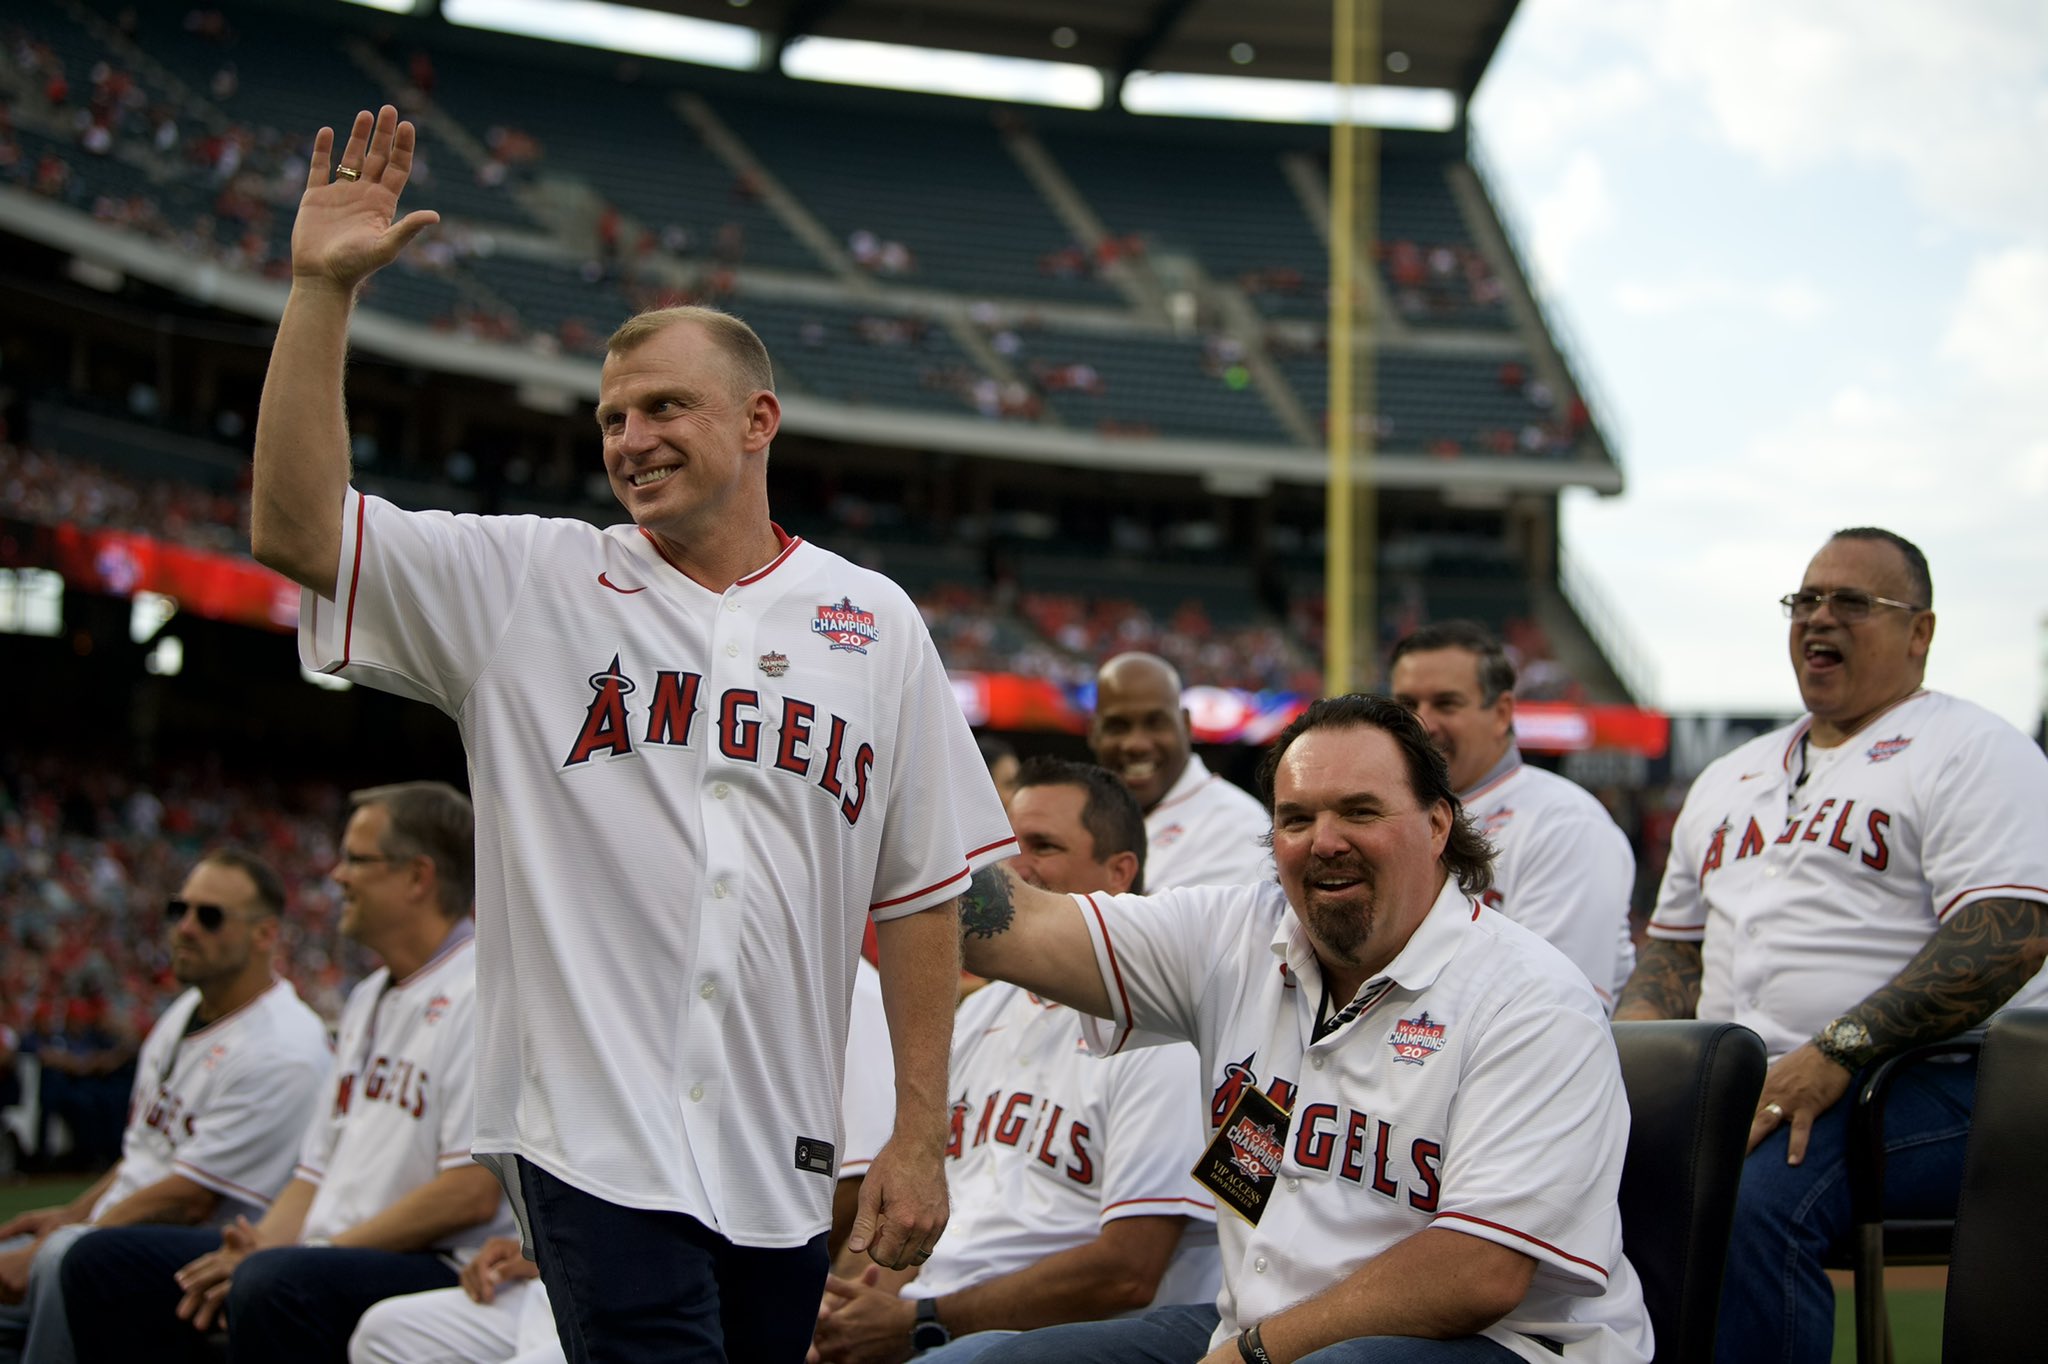 Los Angeles Angels on X: In honor of our upcoming World Series